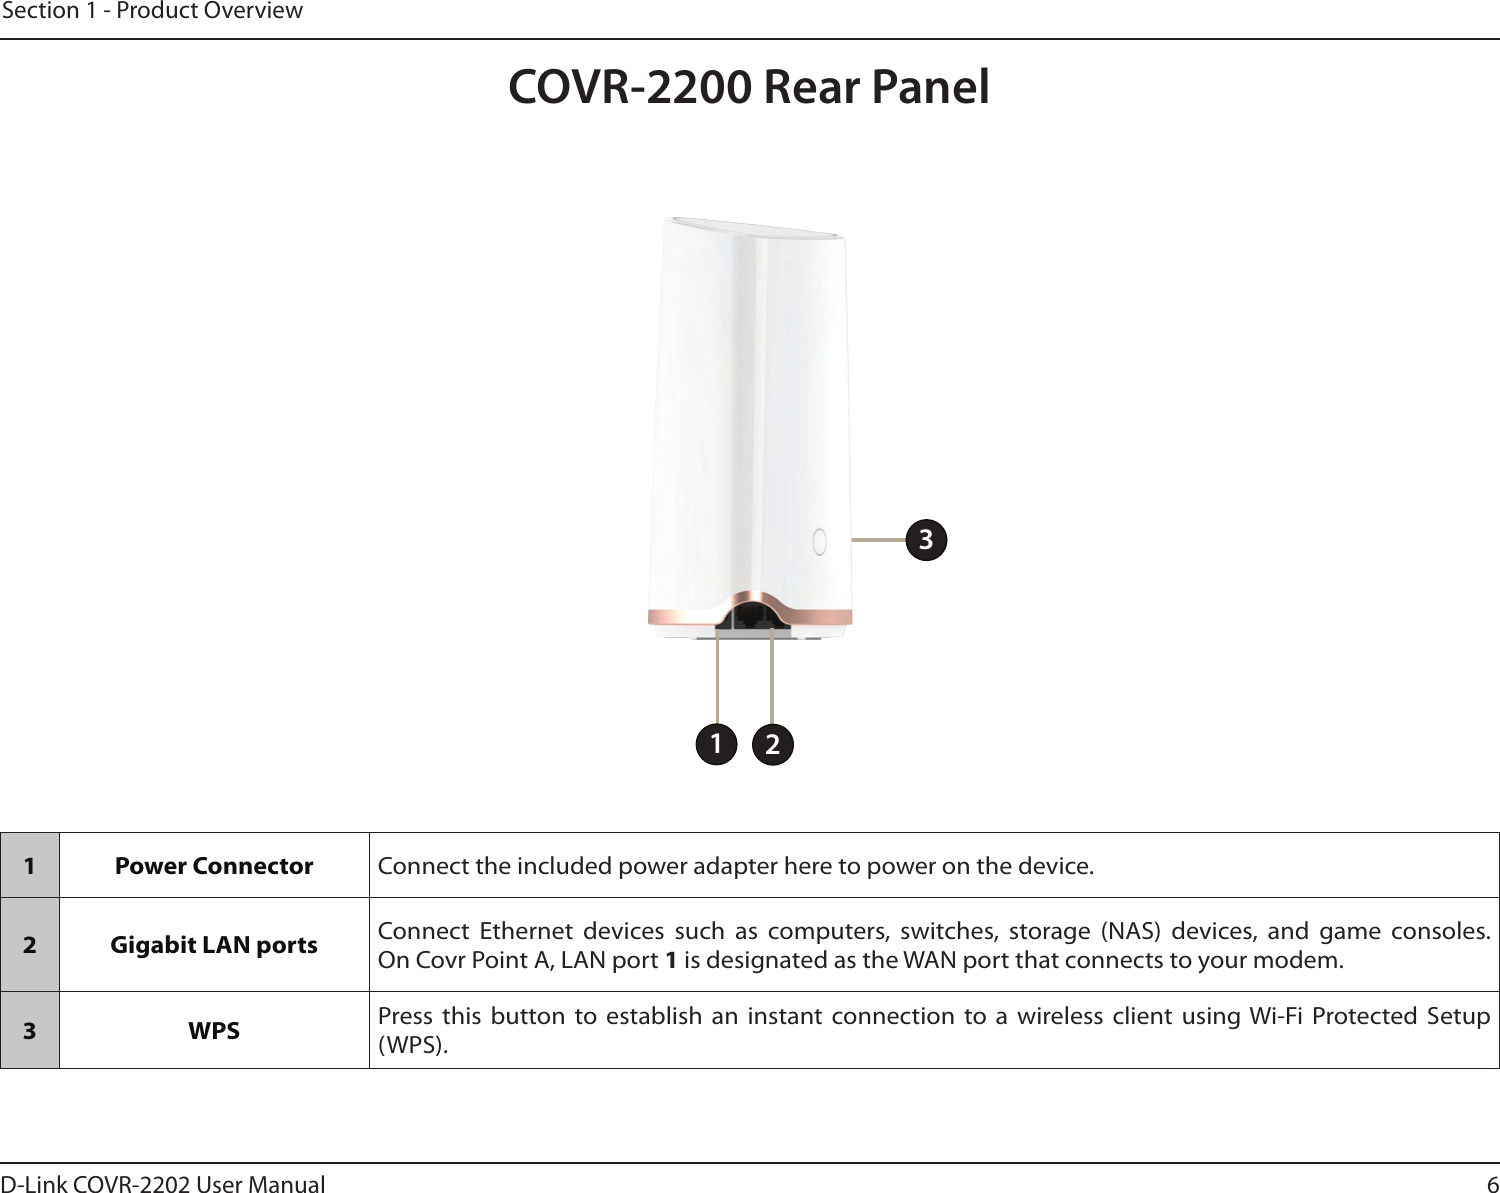 6D-Link COVR-2202 User ManualSection 1 - Product OverviewCOVR-2200 Rear Panel1 Power Connector Connect the included power adapter here to power on the device.2 Gigabit LAN ports Connect Ethernet devices such as computers, switches, storage (NAS) devices, and game consoles.  On Covr Point A, LAN port 1 is designated as the WAN port that connects to your modem.3 WPS Press this button to establish an instant connection to a wireless client using Wi-Fi Protected Setup (WPS). 312